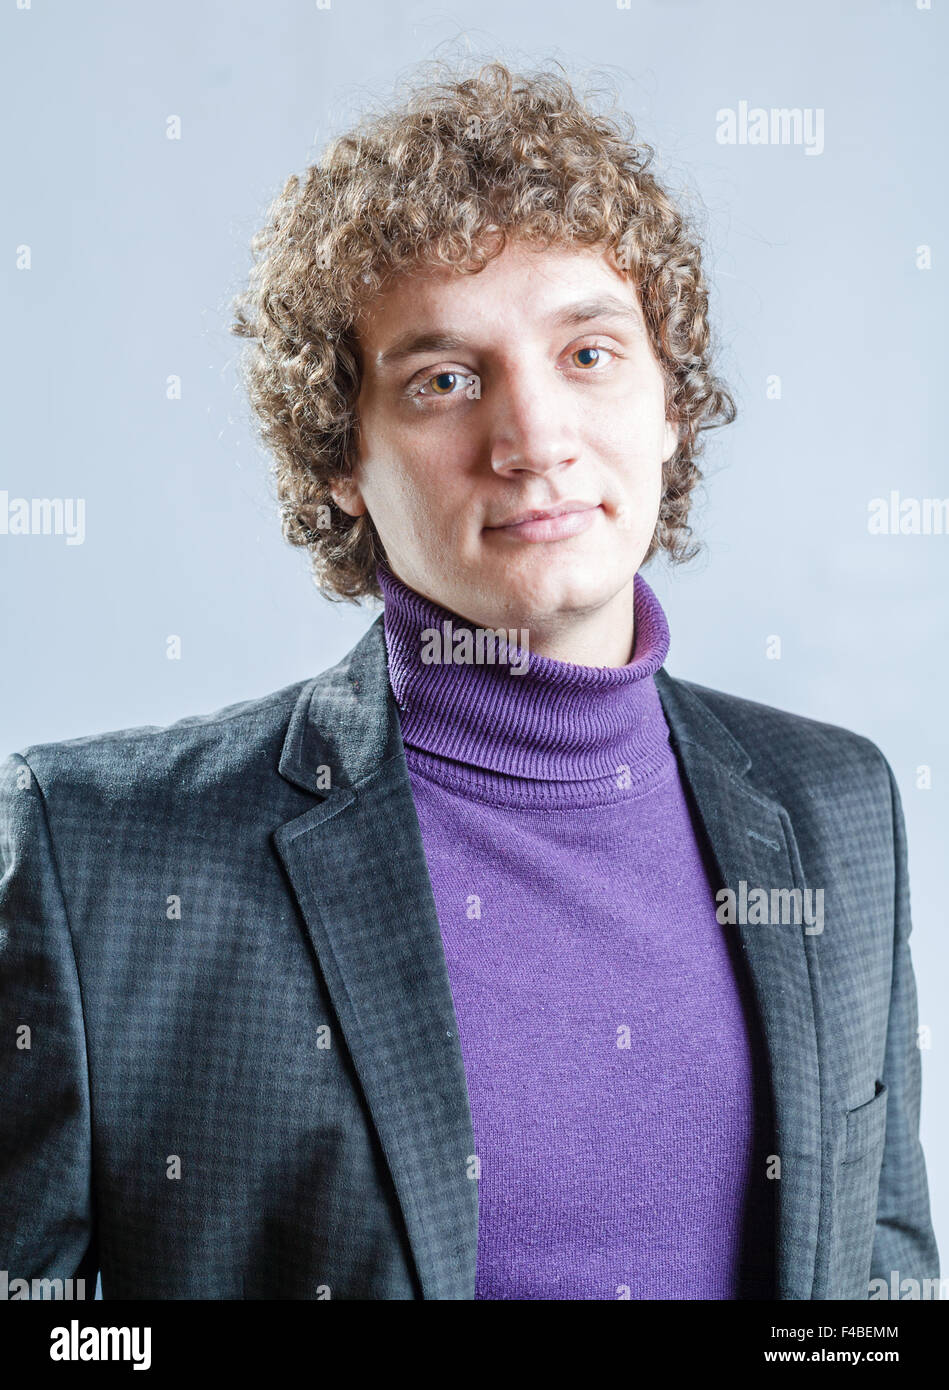 portrait of a young guy with curly hair Stock Photo